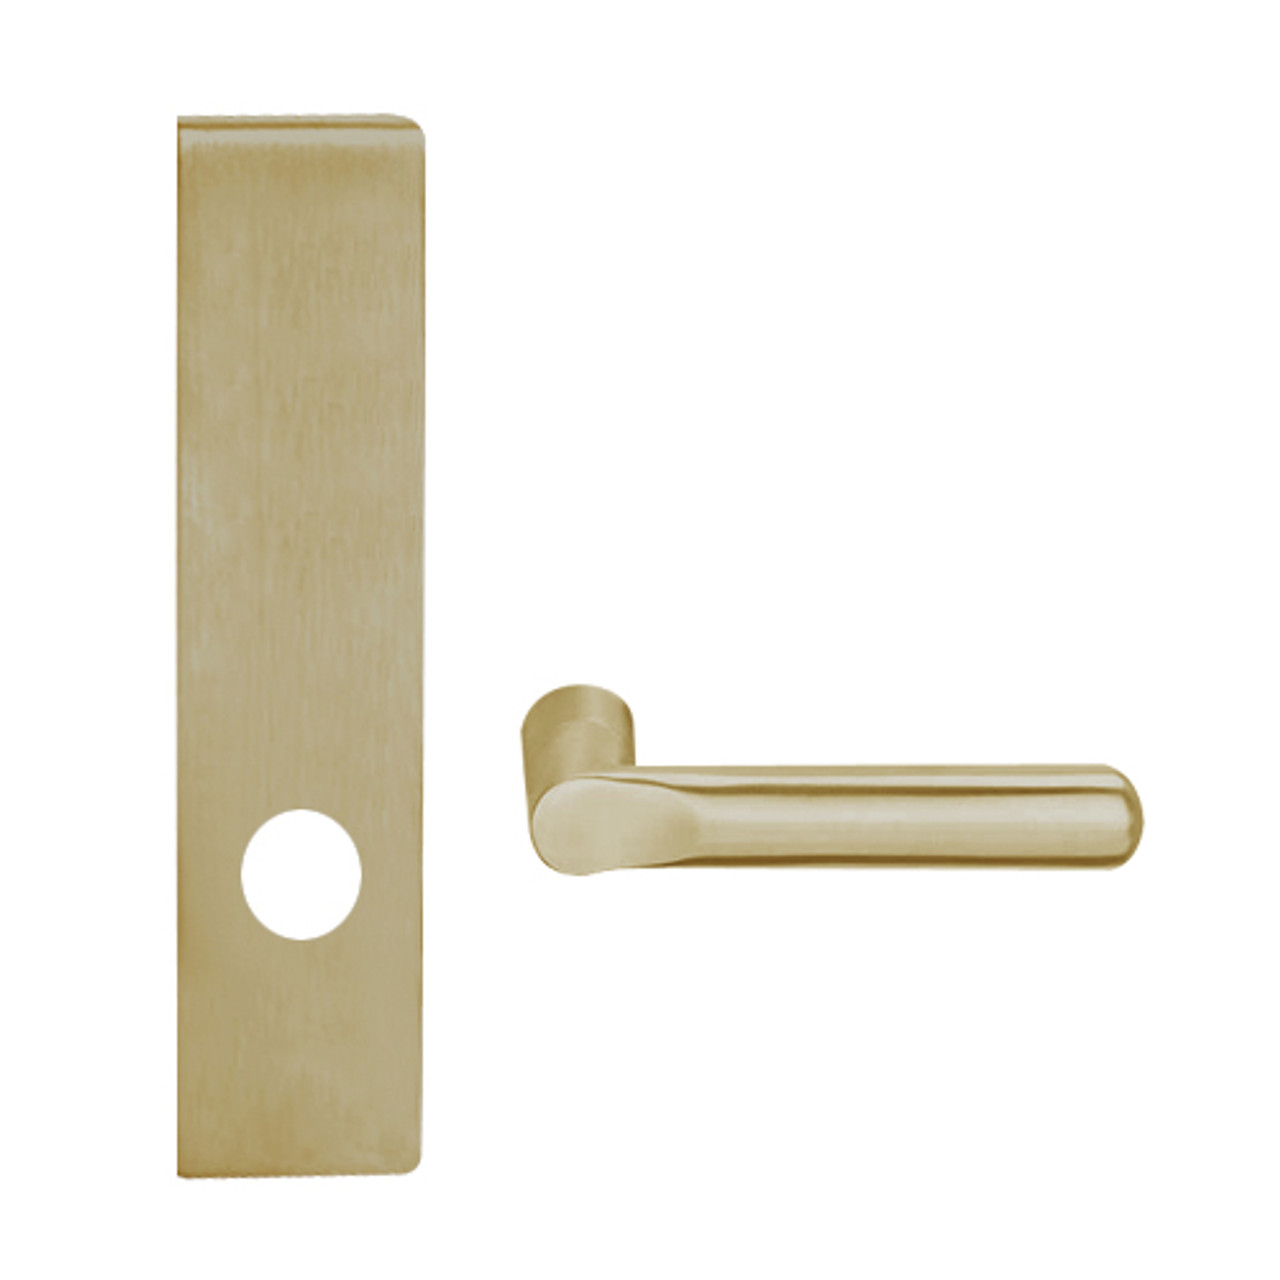 L9440-18L-613 Schlage L Series Privacy with Deadbolt Commercial Mortise Lock with 18 Cast Lever Design in Oil Rubbed Bronze